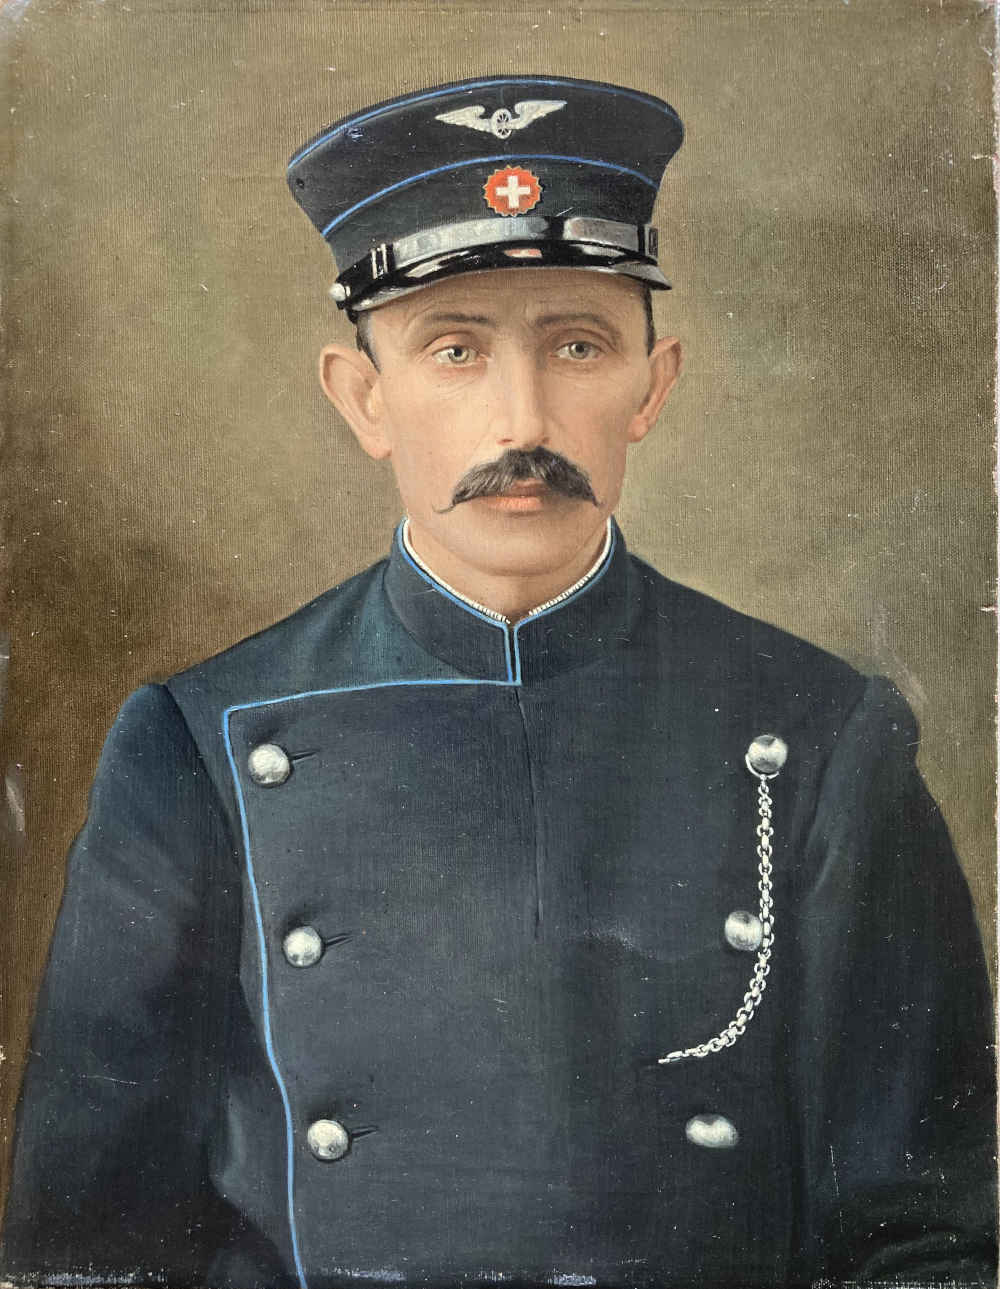 Oil painting of railwayman, conductor SBB, conductor, train attendant in SBB uniform from 1902 to 1932.